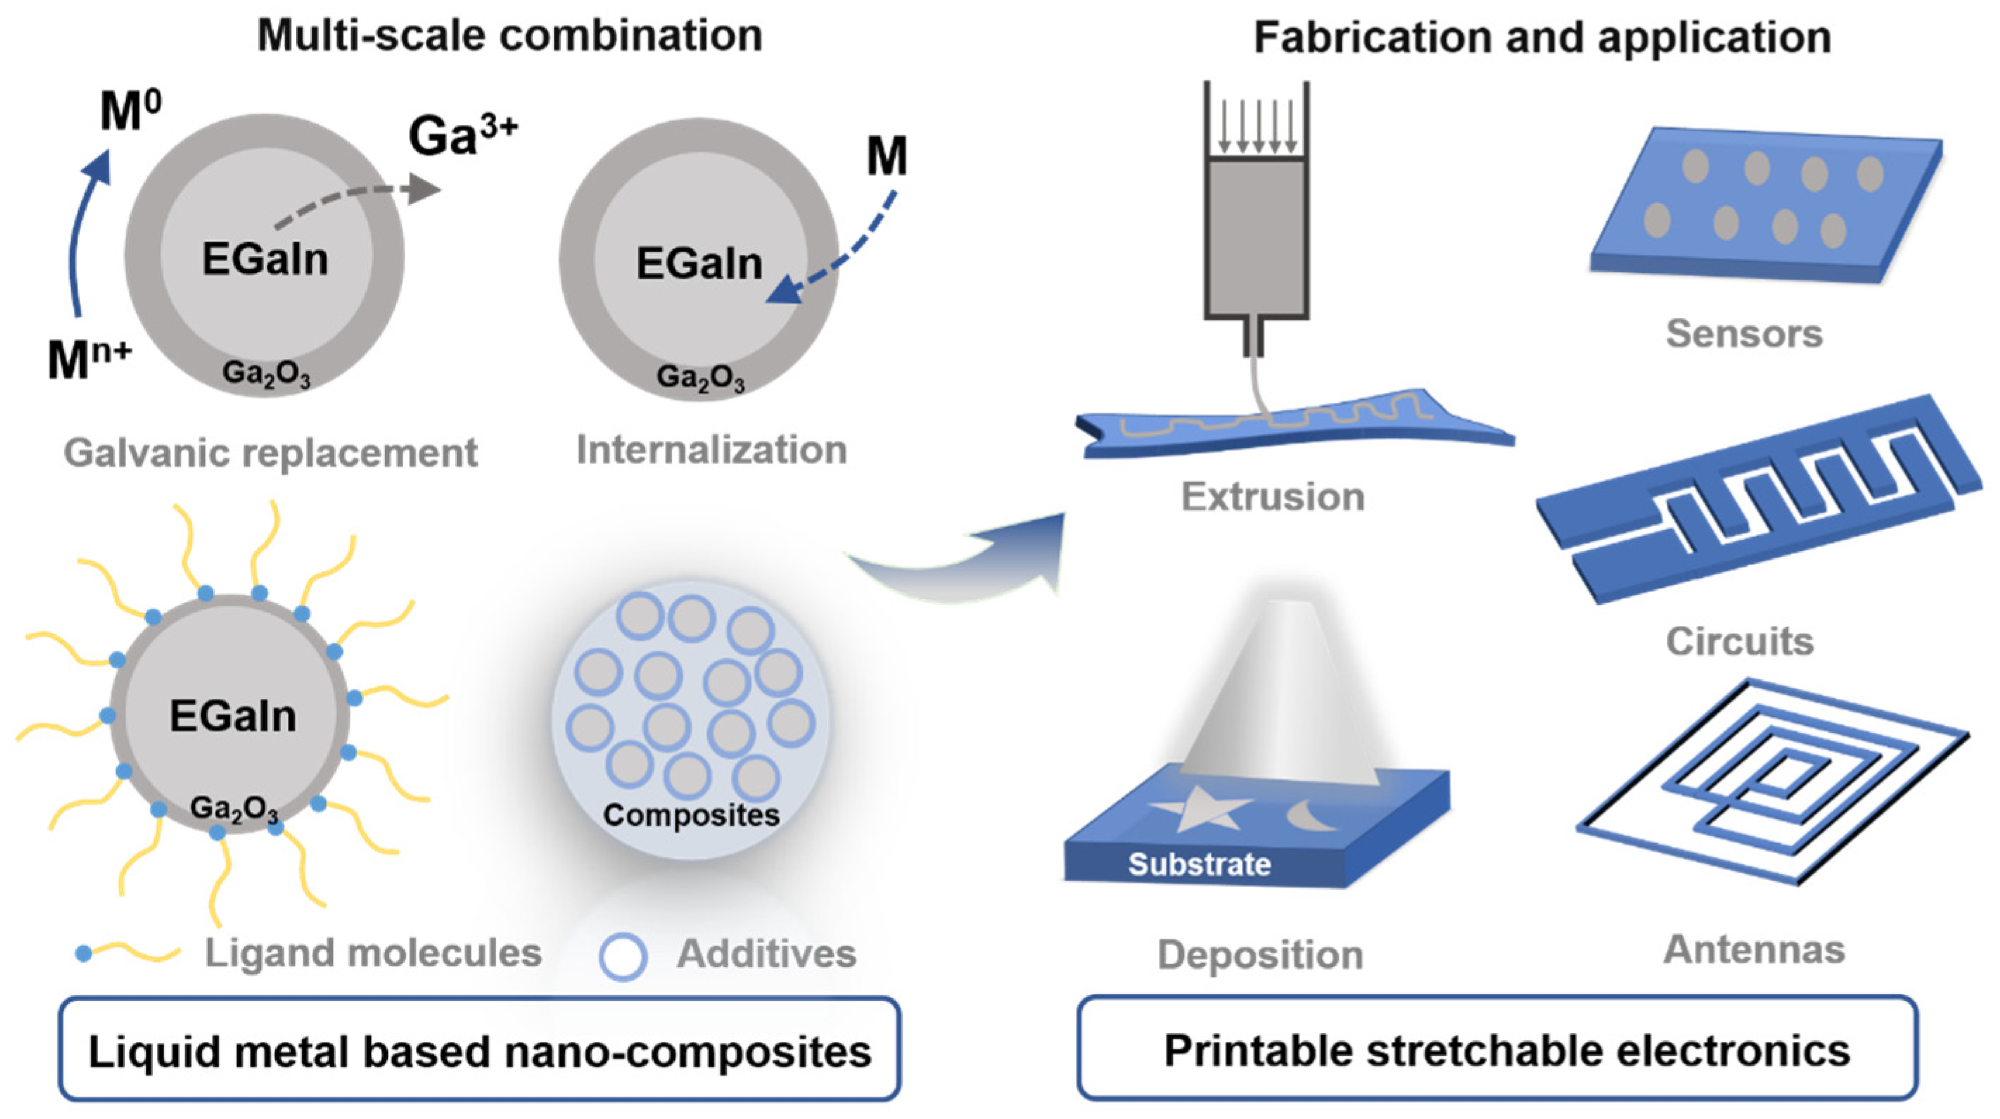 Schematic illustration of liquid metal-based nano-composites and the application of printable stretchable electronics.